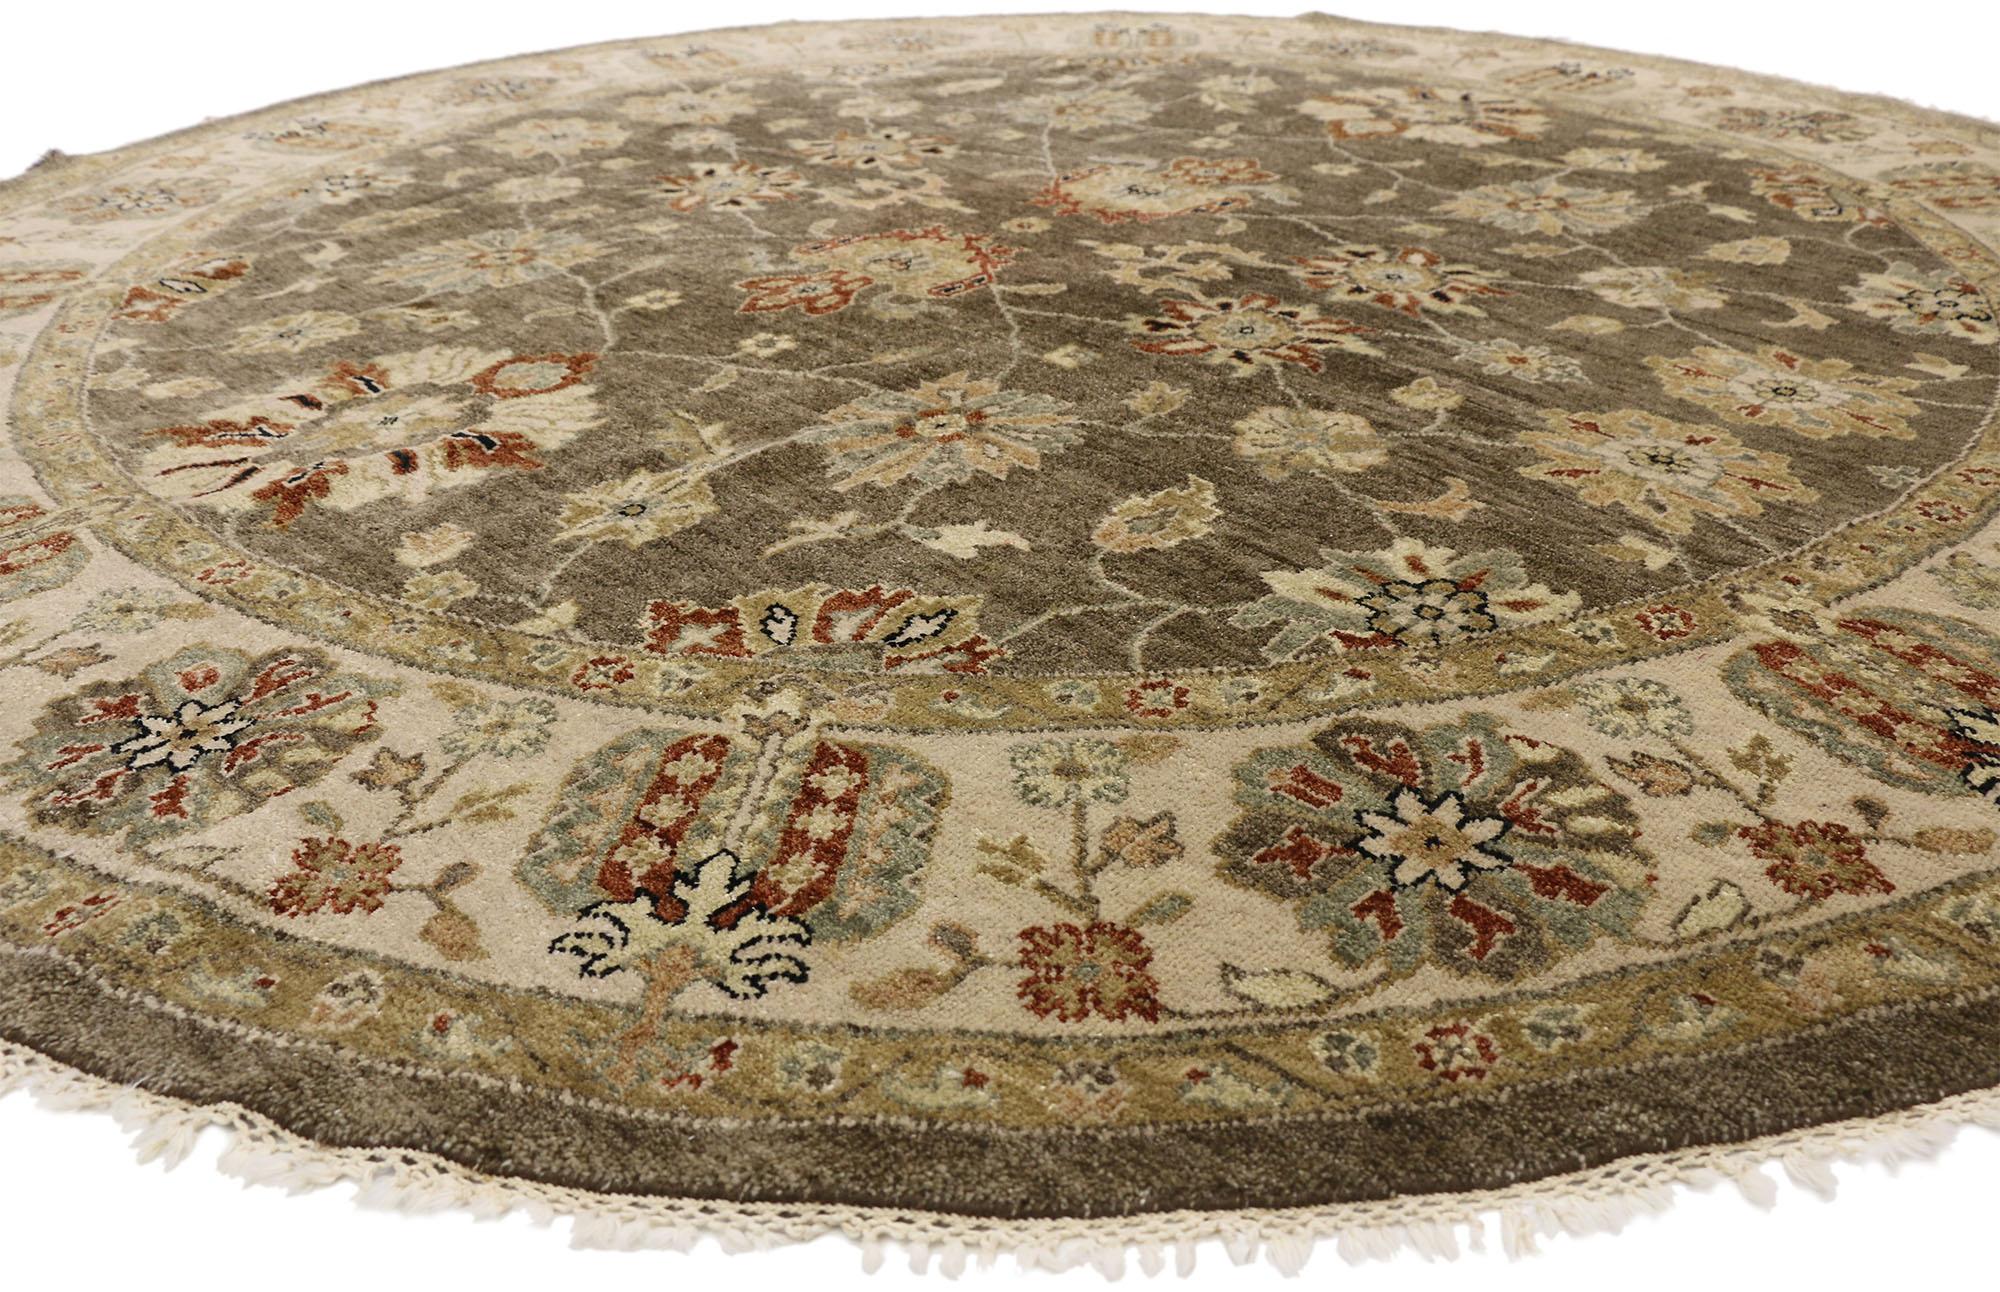 77297 Vintage Indian Round Area Rug, Circular Rug with Arts and Crafts Style 08'09 x 08'10. This vintage hand knotted wool Indian round area rug features an all-over floral pattern spread across an abrashed field. Large harshang palmettes, leafy